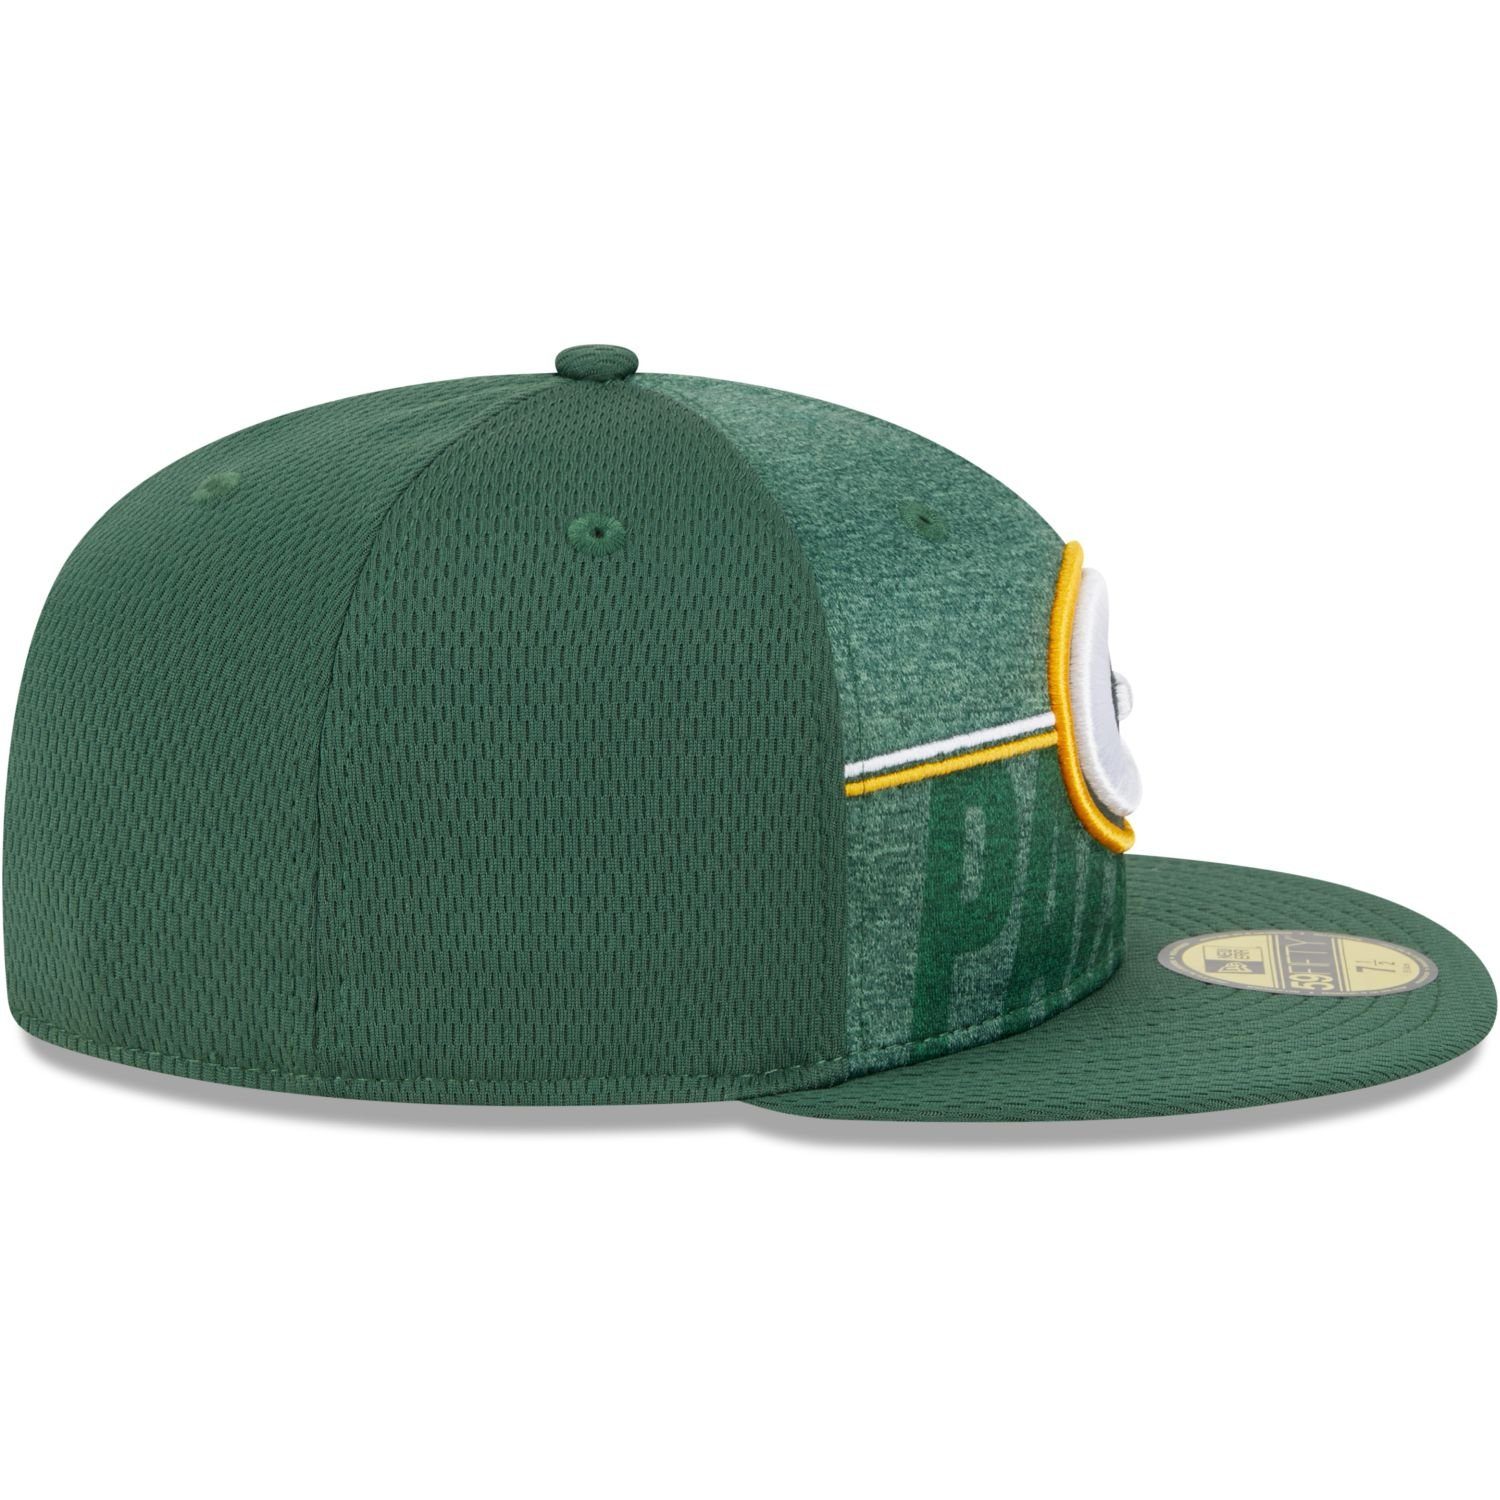 New Era Fitted Green Cap TRAINING 59Fifty Bay Packers NFL